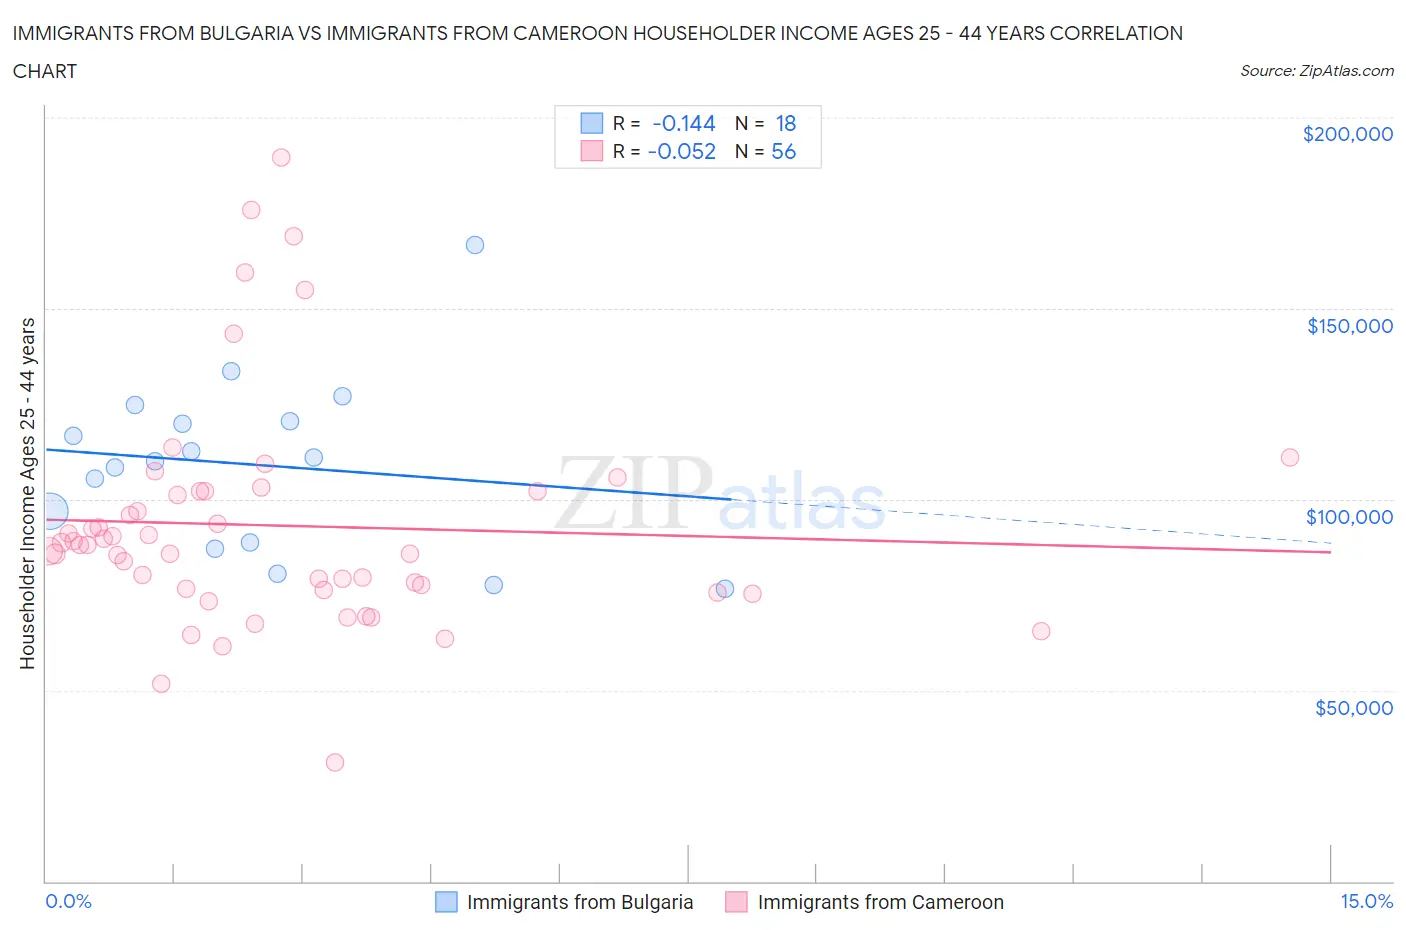 Immigrants from Bulgaria vs Immigrants from Cameroon Householder Income Ages 25 - 44 years